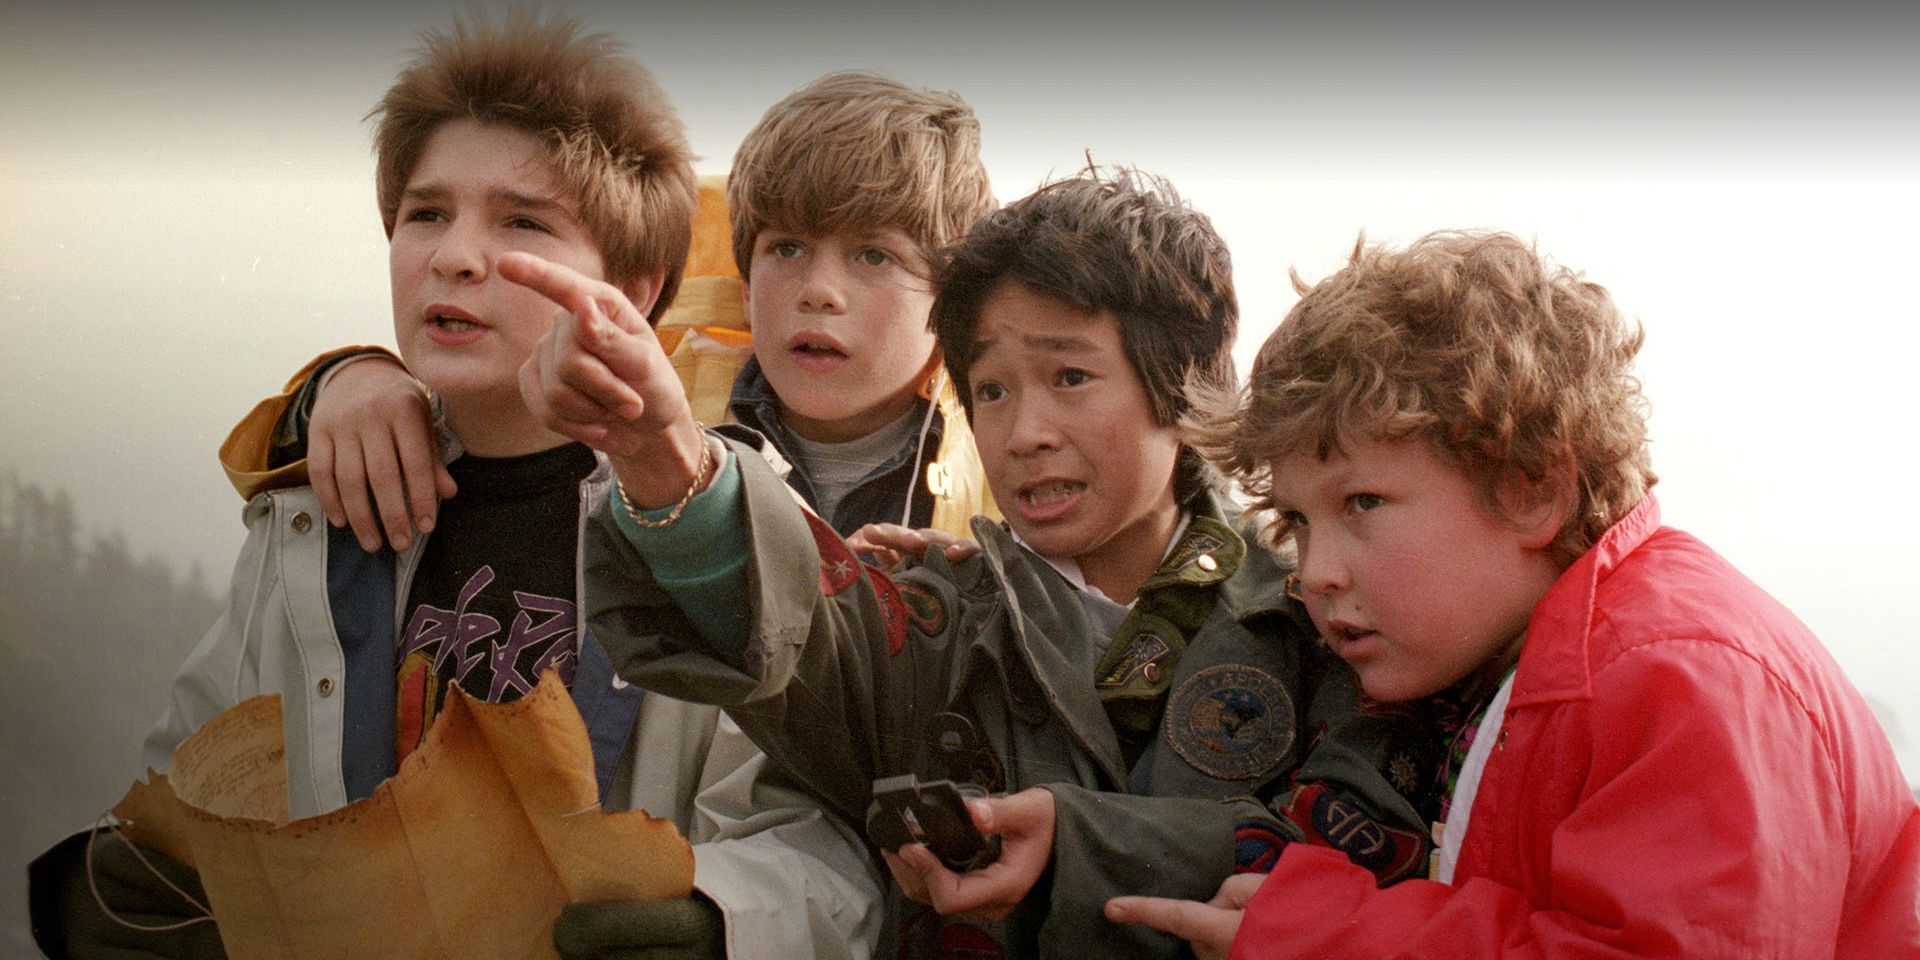 Mouth, Mikey, Data, and Chunk examining the map and something in the distance in The Goonies